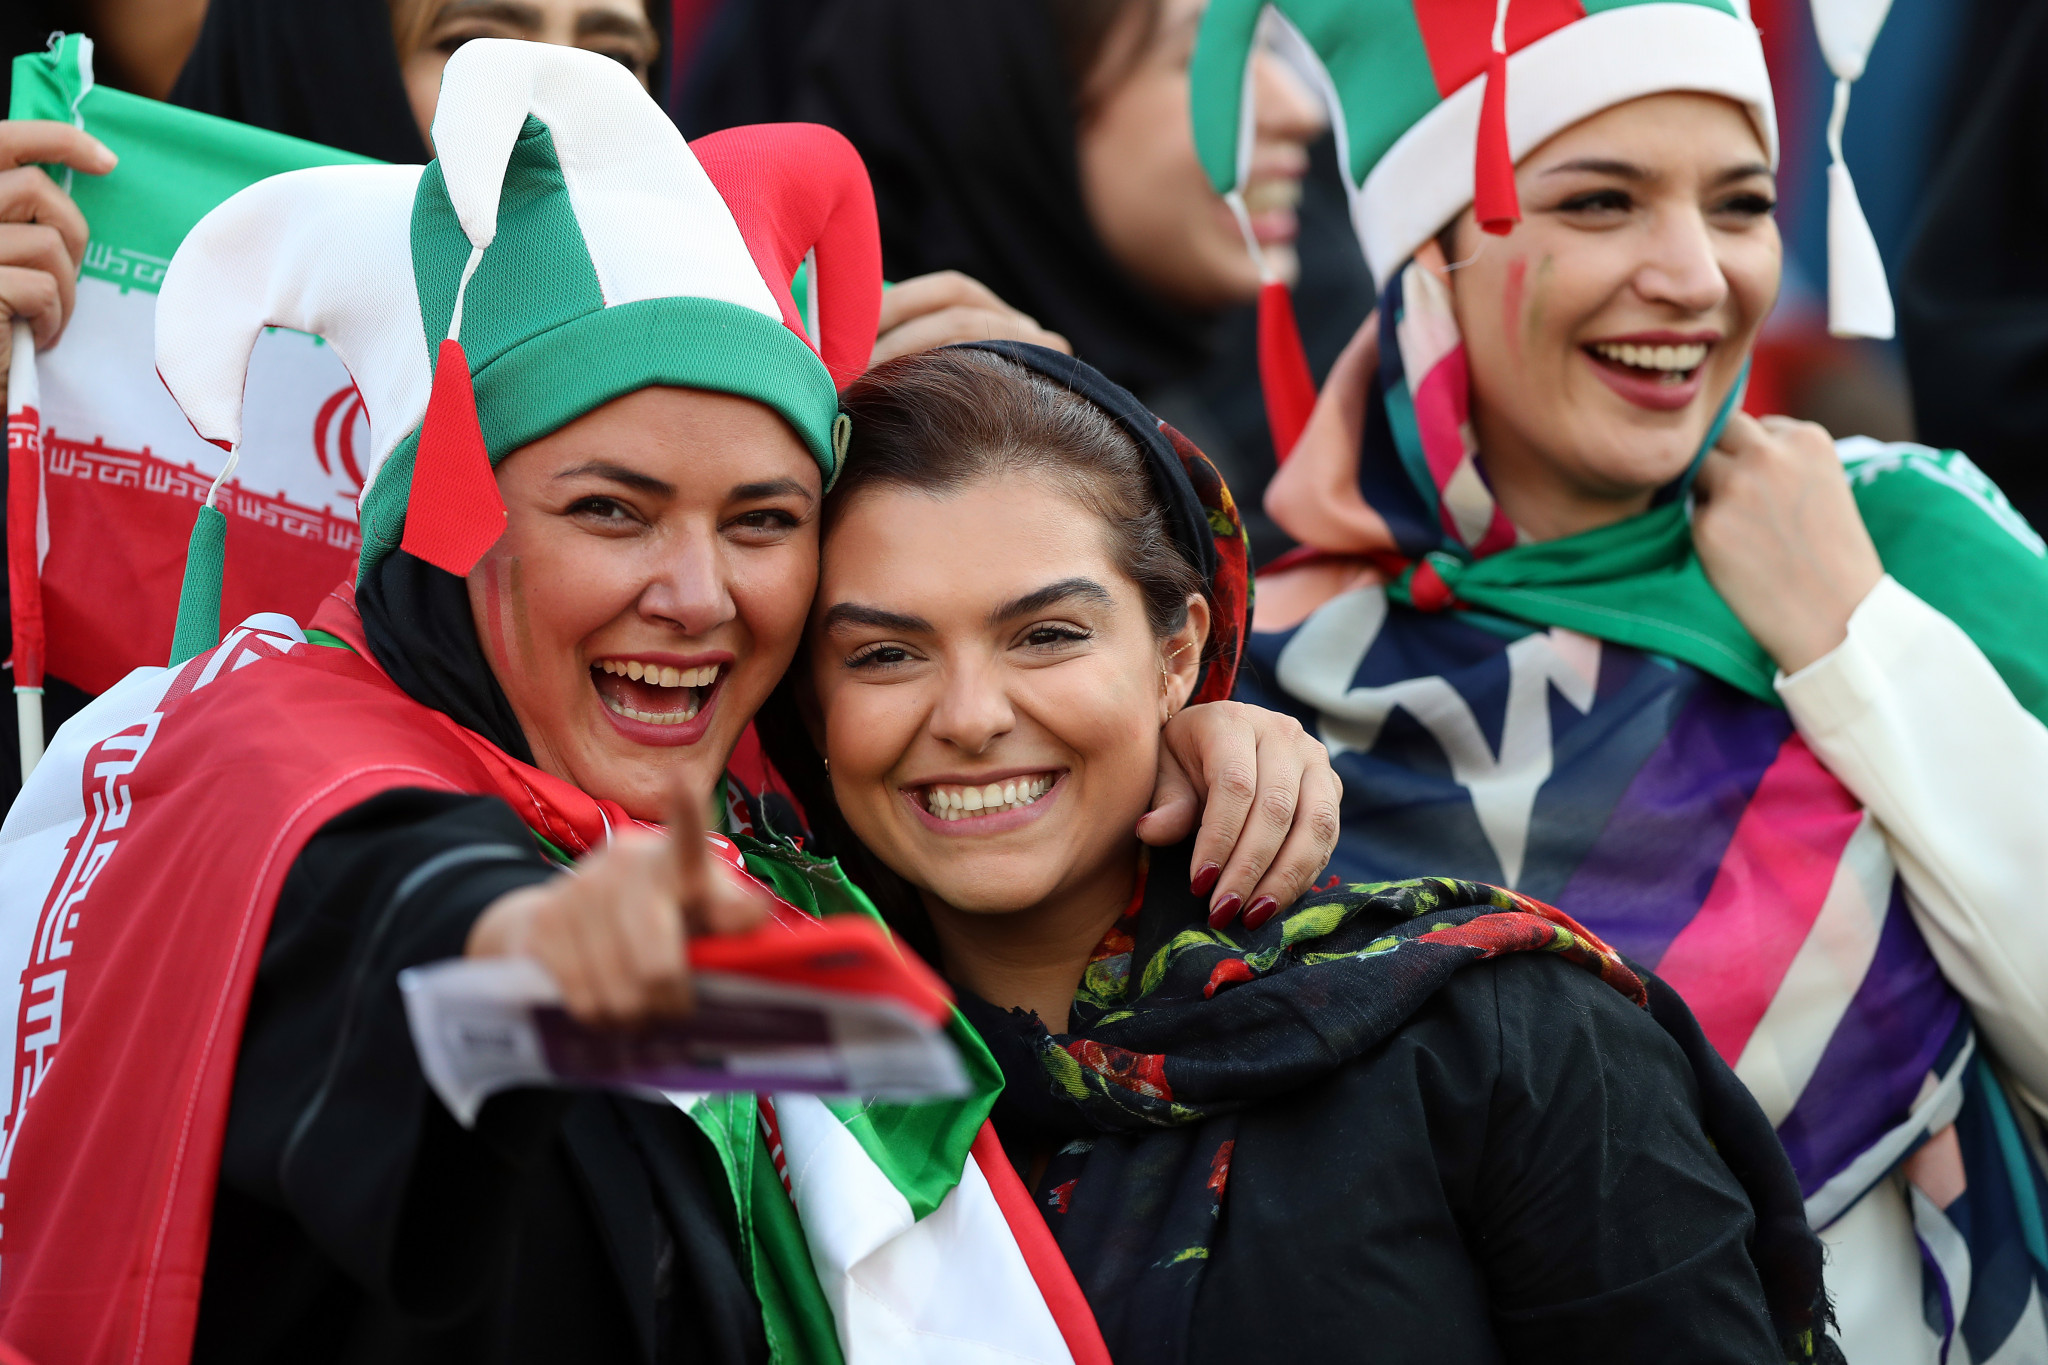 Women were allowed into Iran's football match against Cambodia at the Azadi Stadium in October 2019, breaking a 40-year ban ©Getty Images